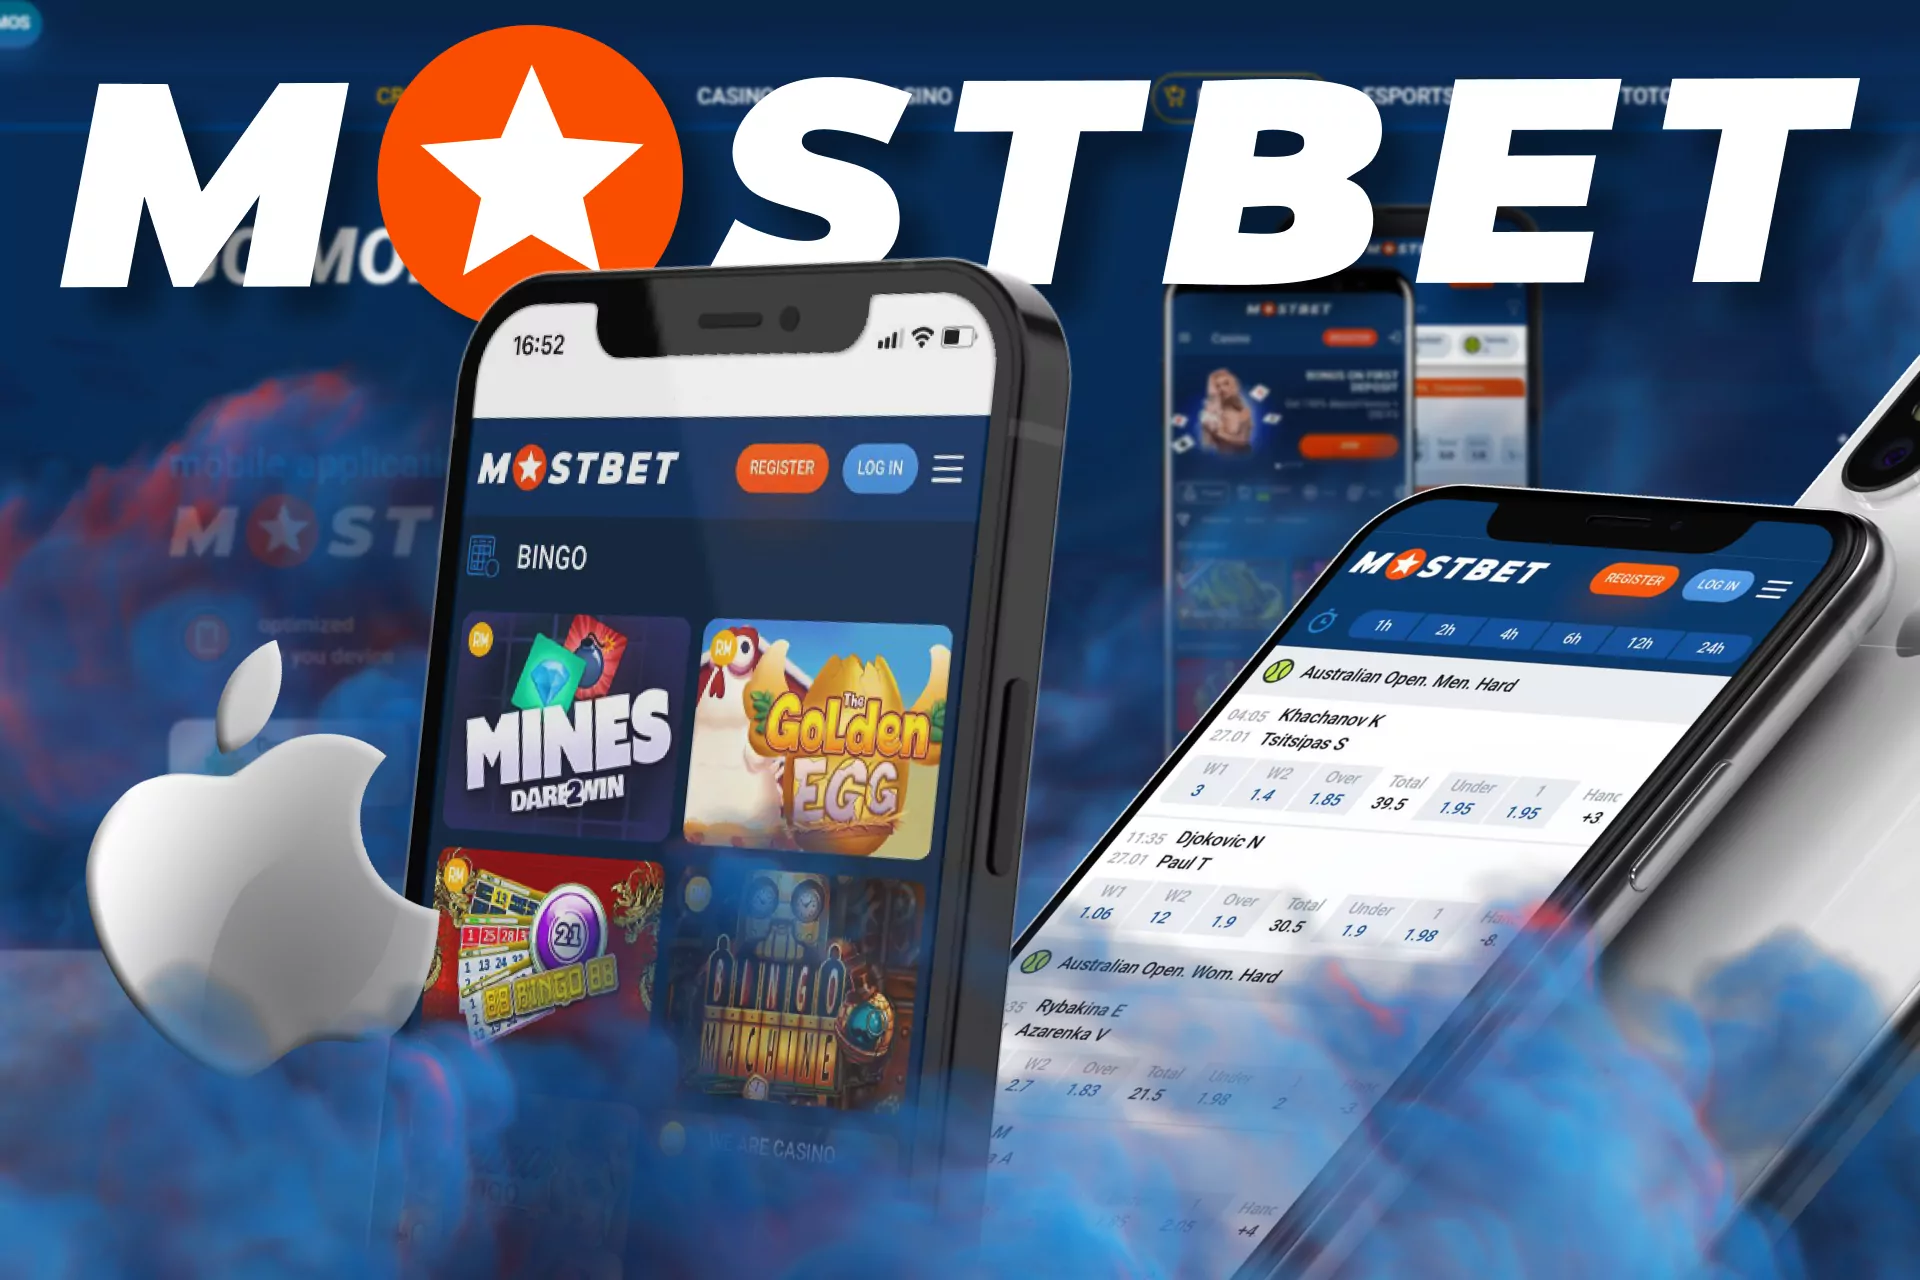 Place your bets and play on Mostbet right on your iOS device.